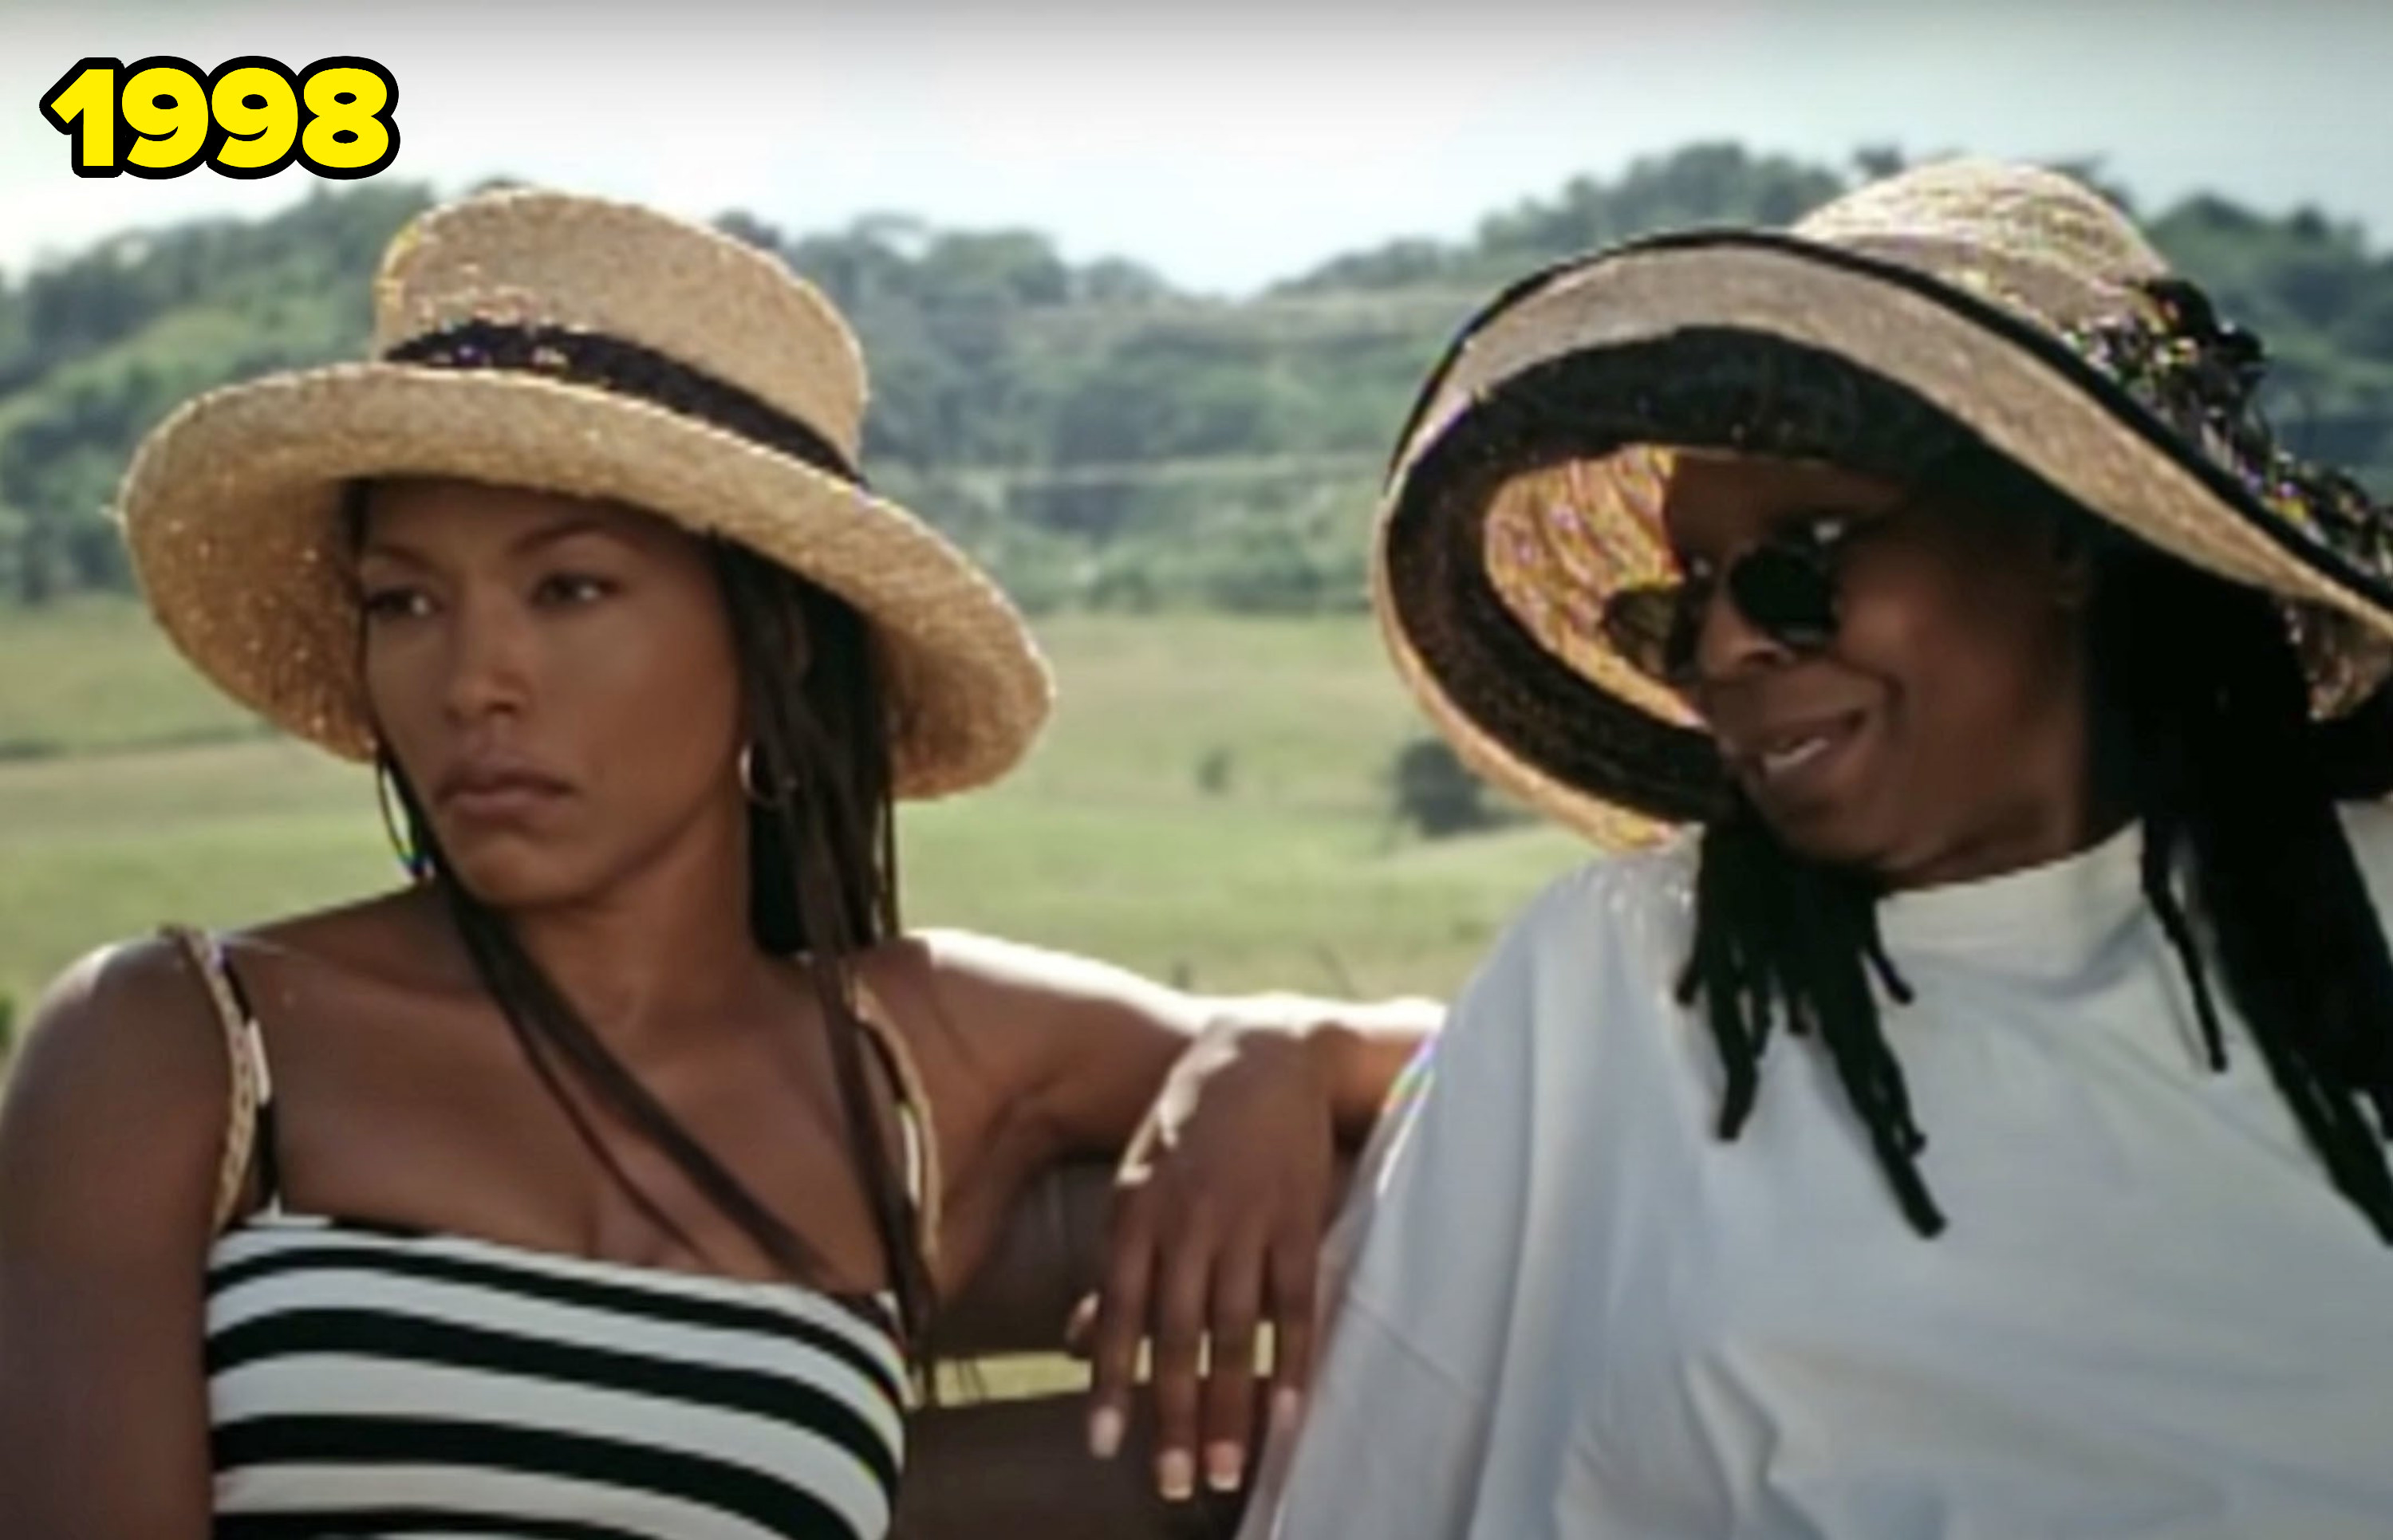 Angela and Whoopi, both wearing sun hats, sitting next to each other in a scene from the film